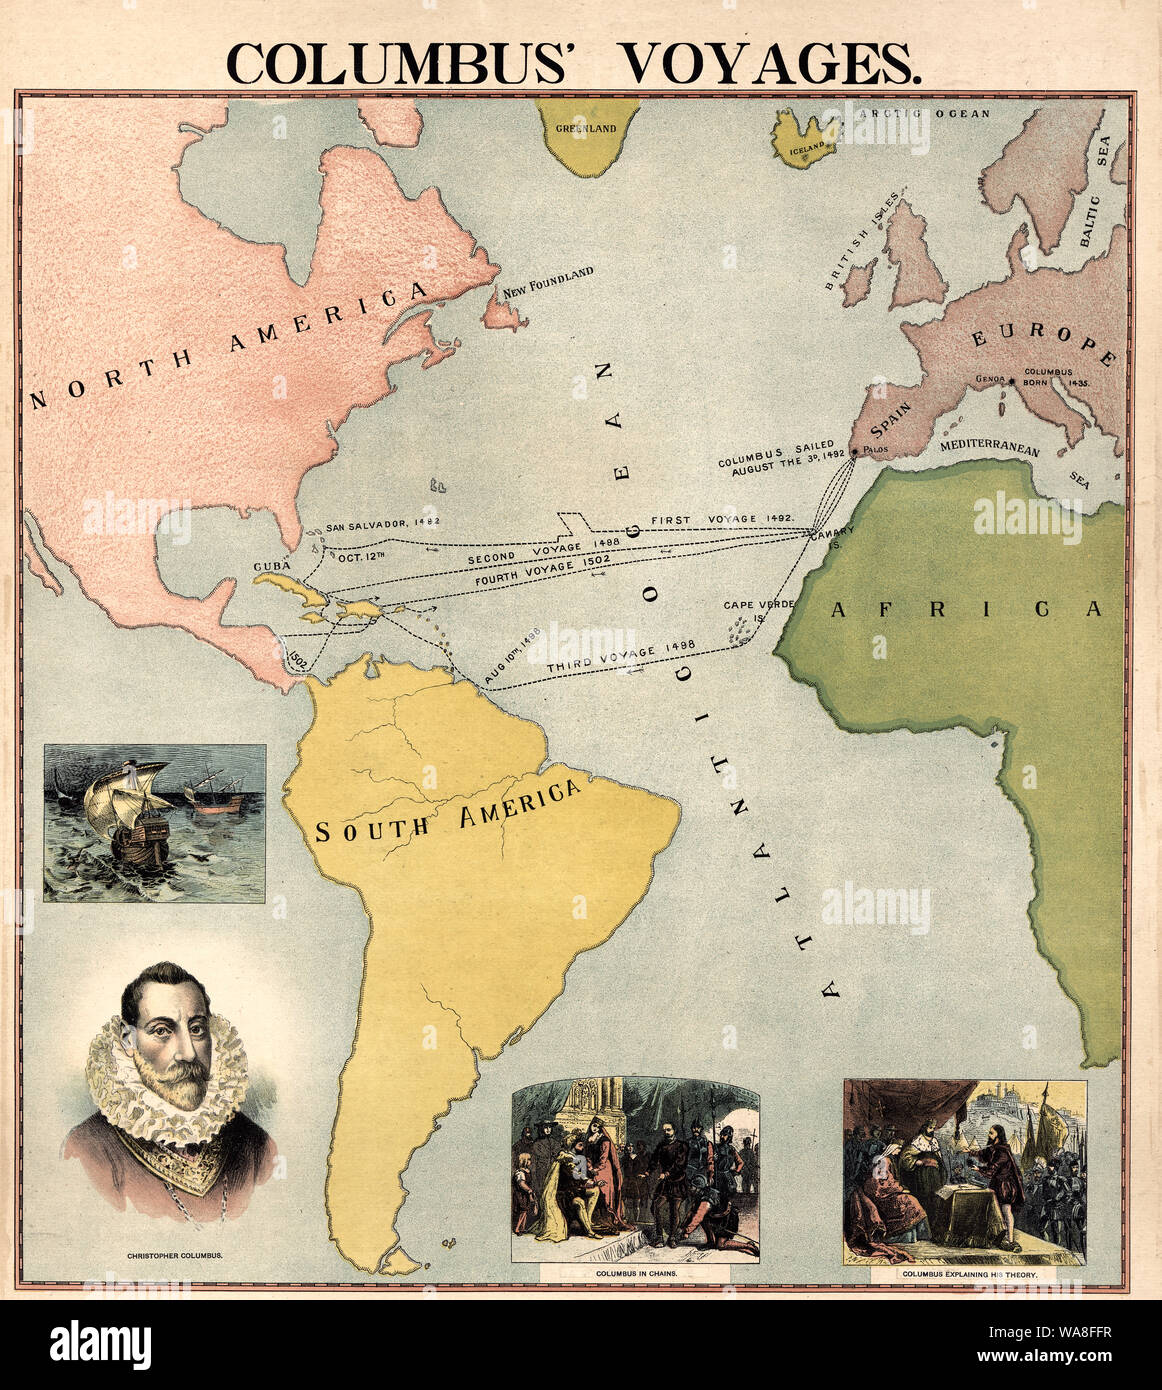 Christopher columbus map hi-res stock and images - Alamy